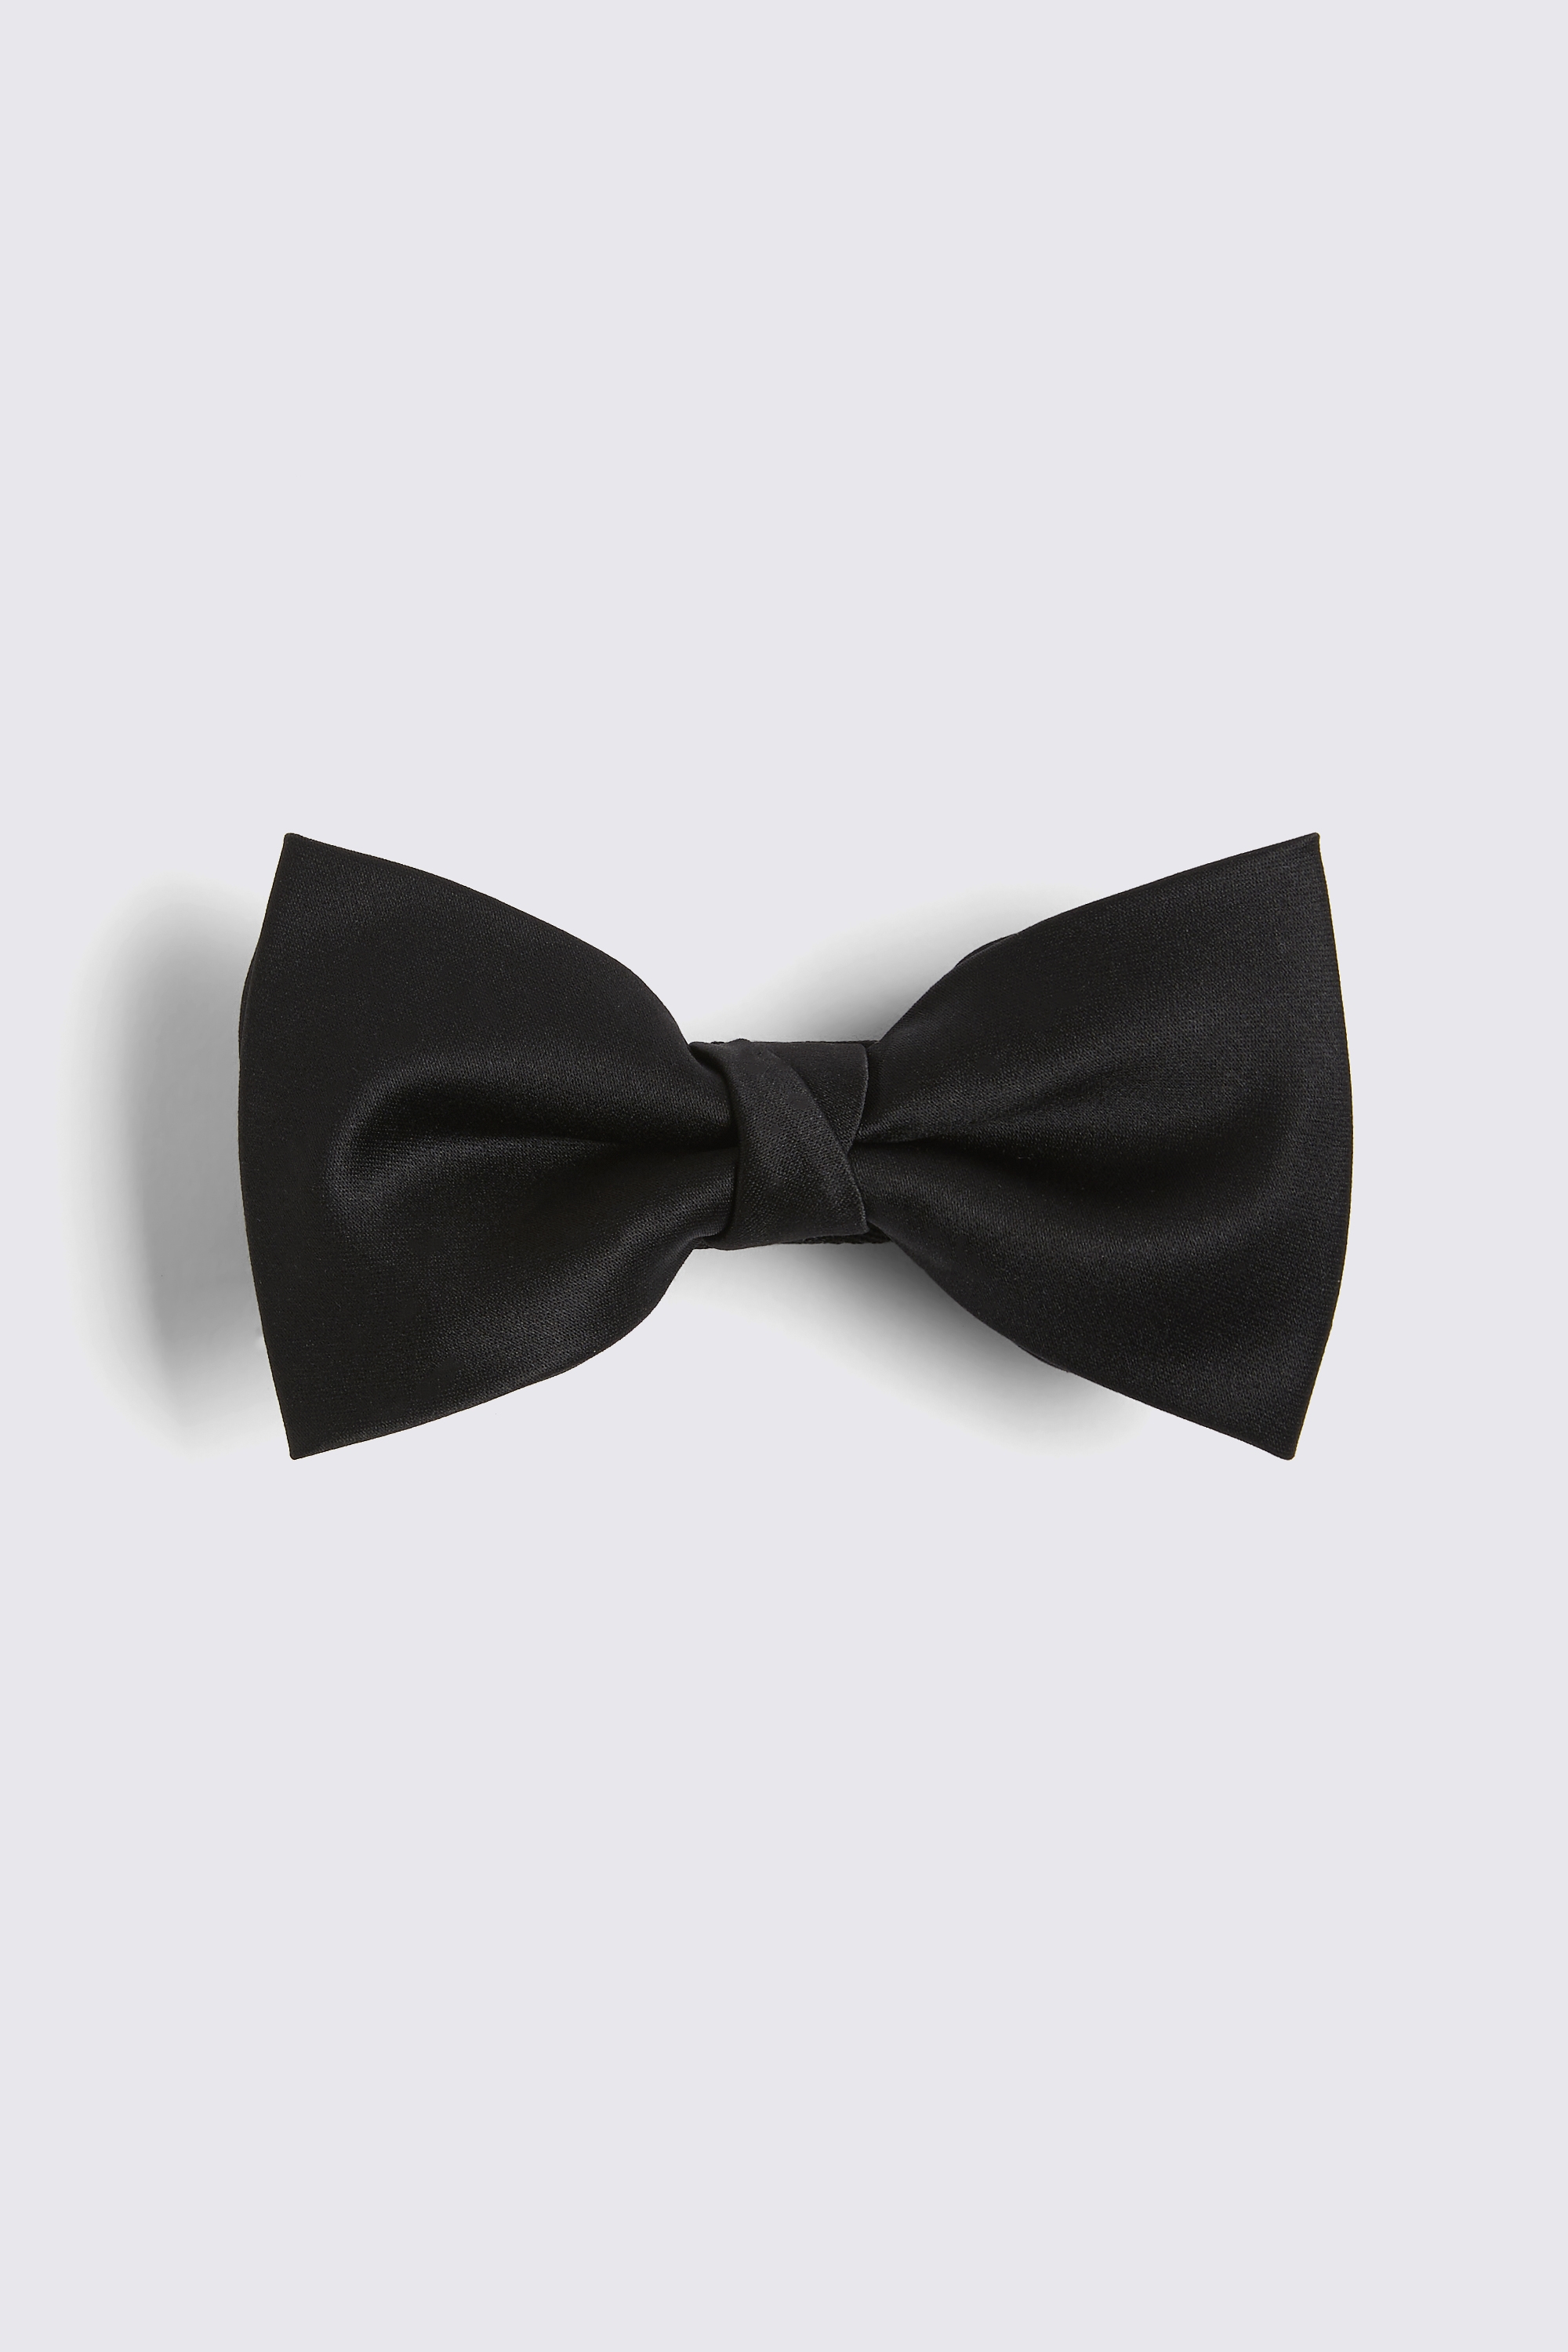 Black Ready Tie Bow Tie | Buy Online at Moss